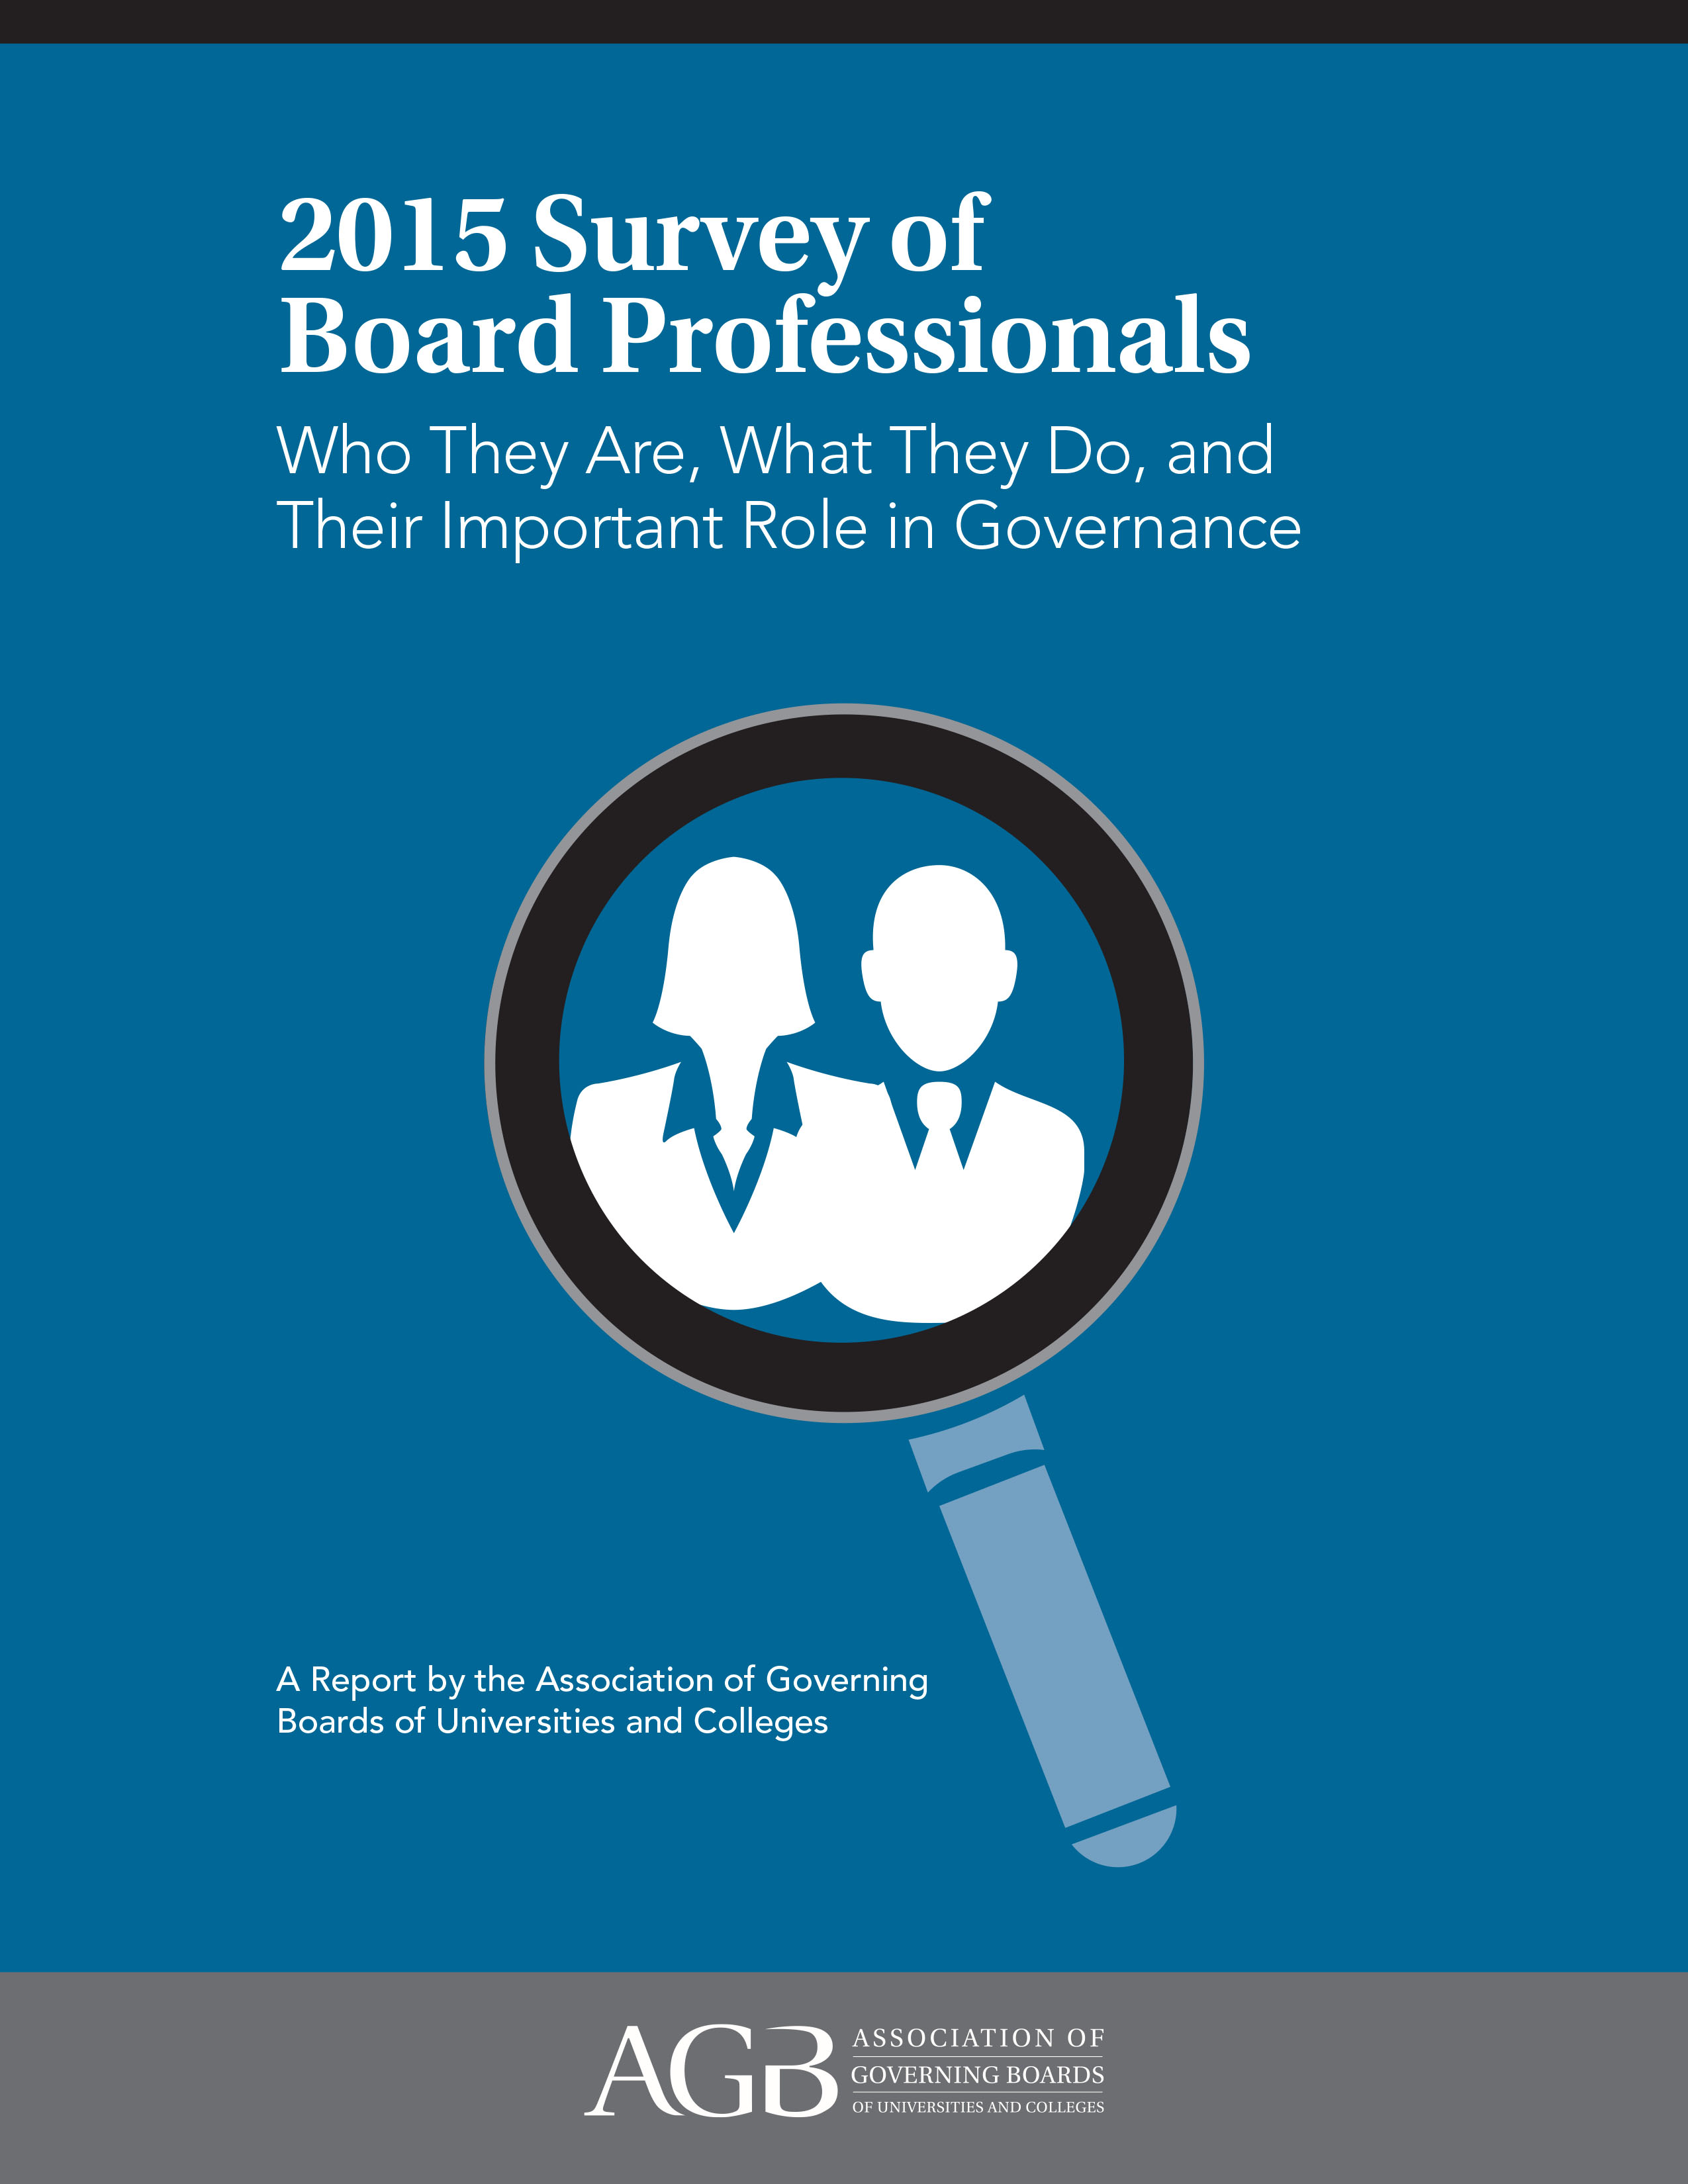 2015 Survey of Board Professionals - Who they are, what they do, and their important role in governance